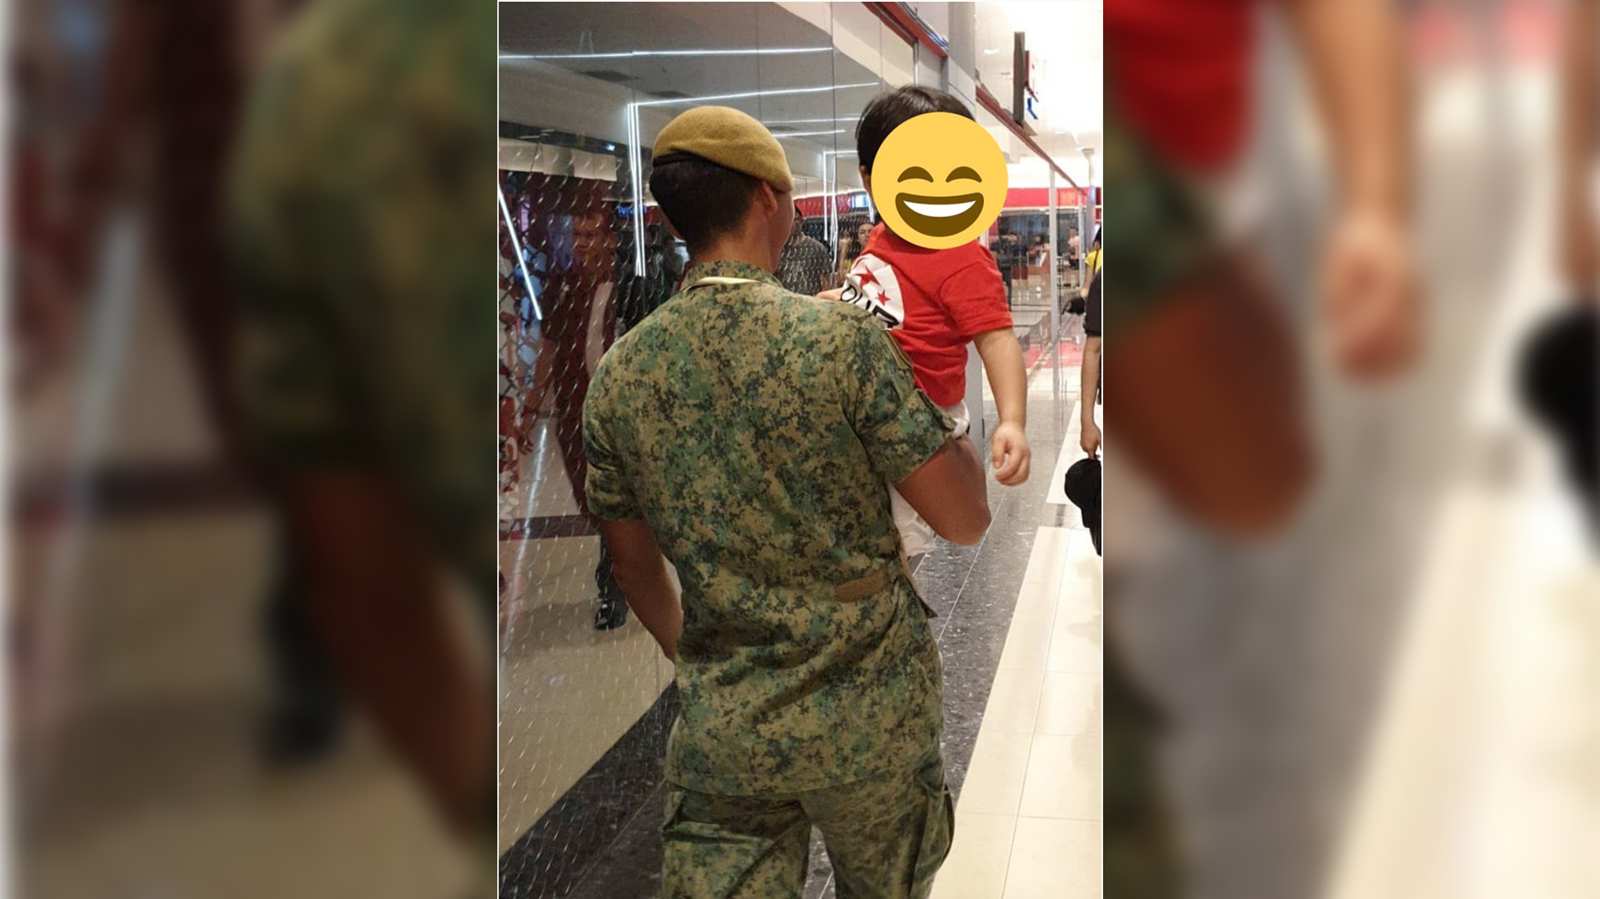 Singapore soldier guides lost family to right location, helps carry child for them